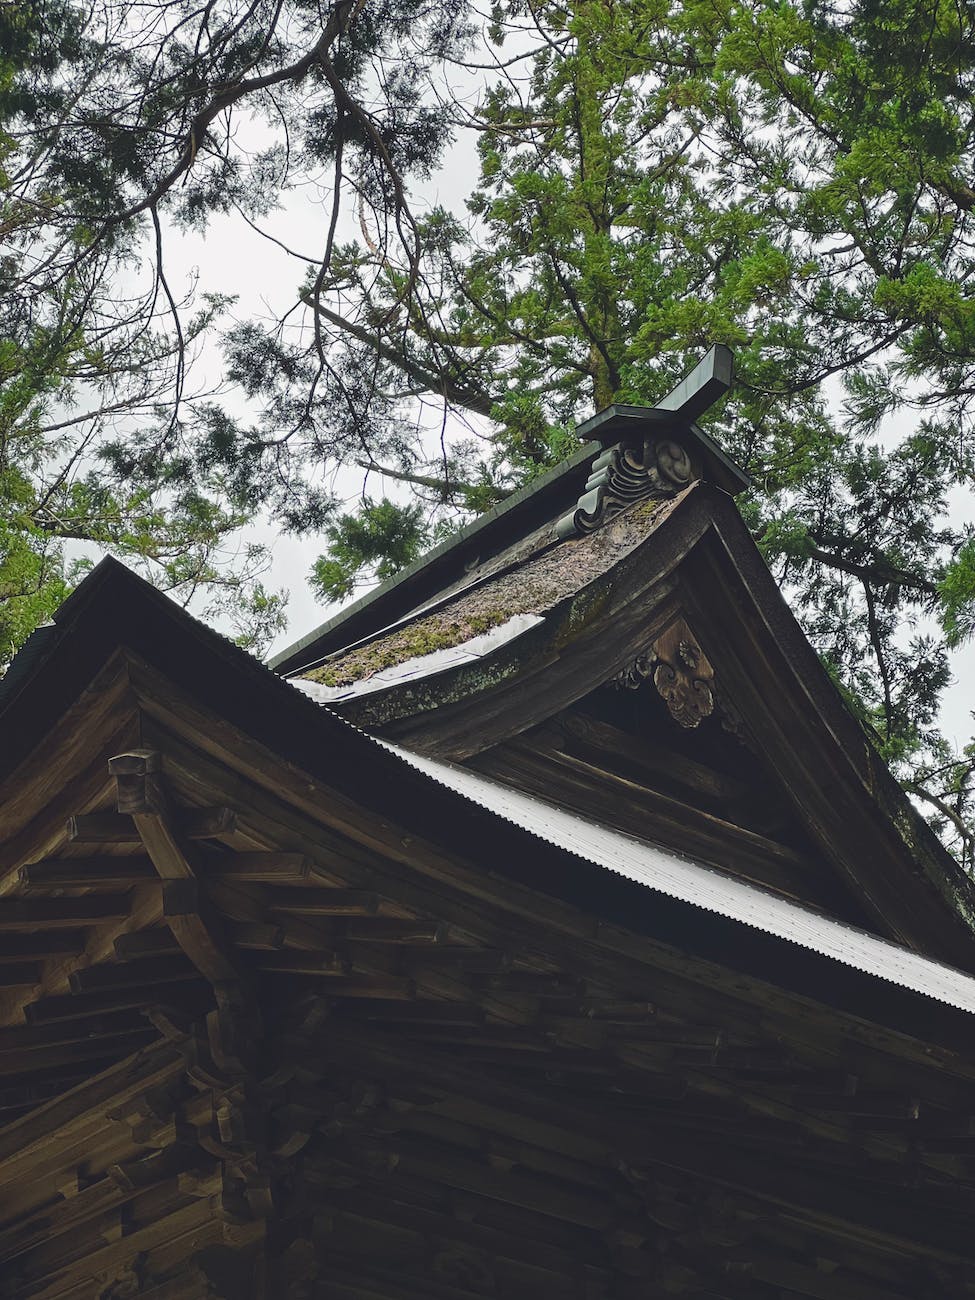 brown wooden roof of a temple